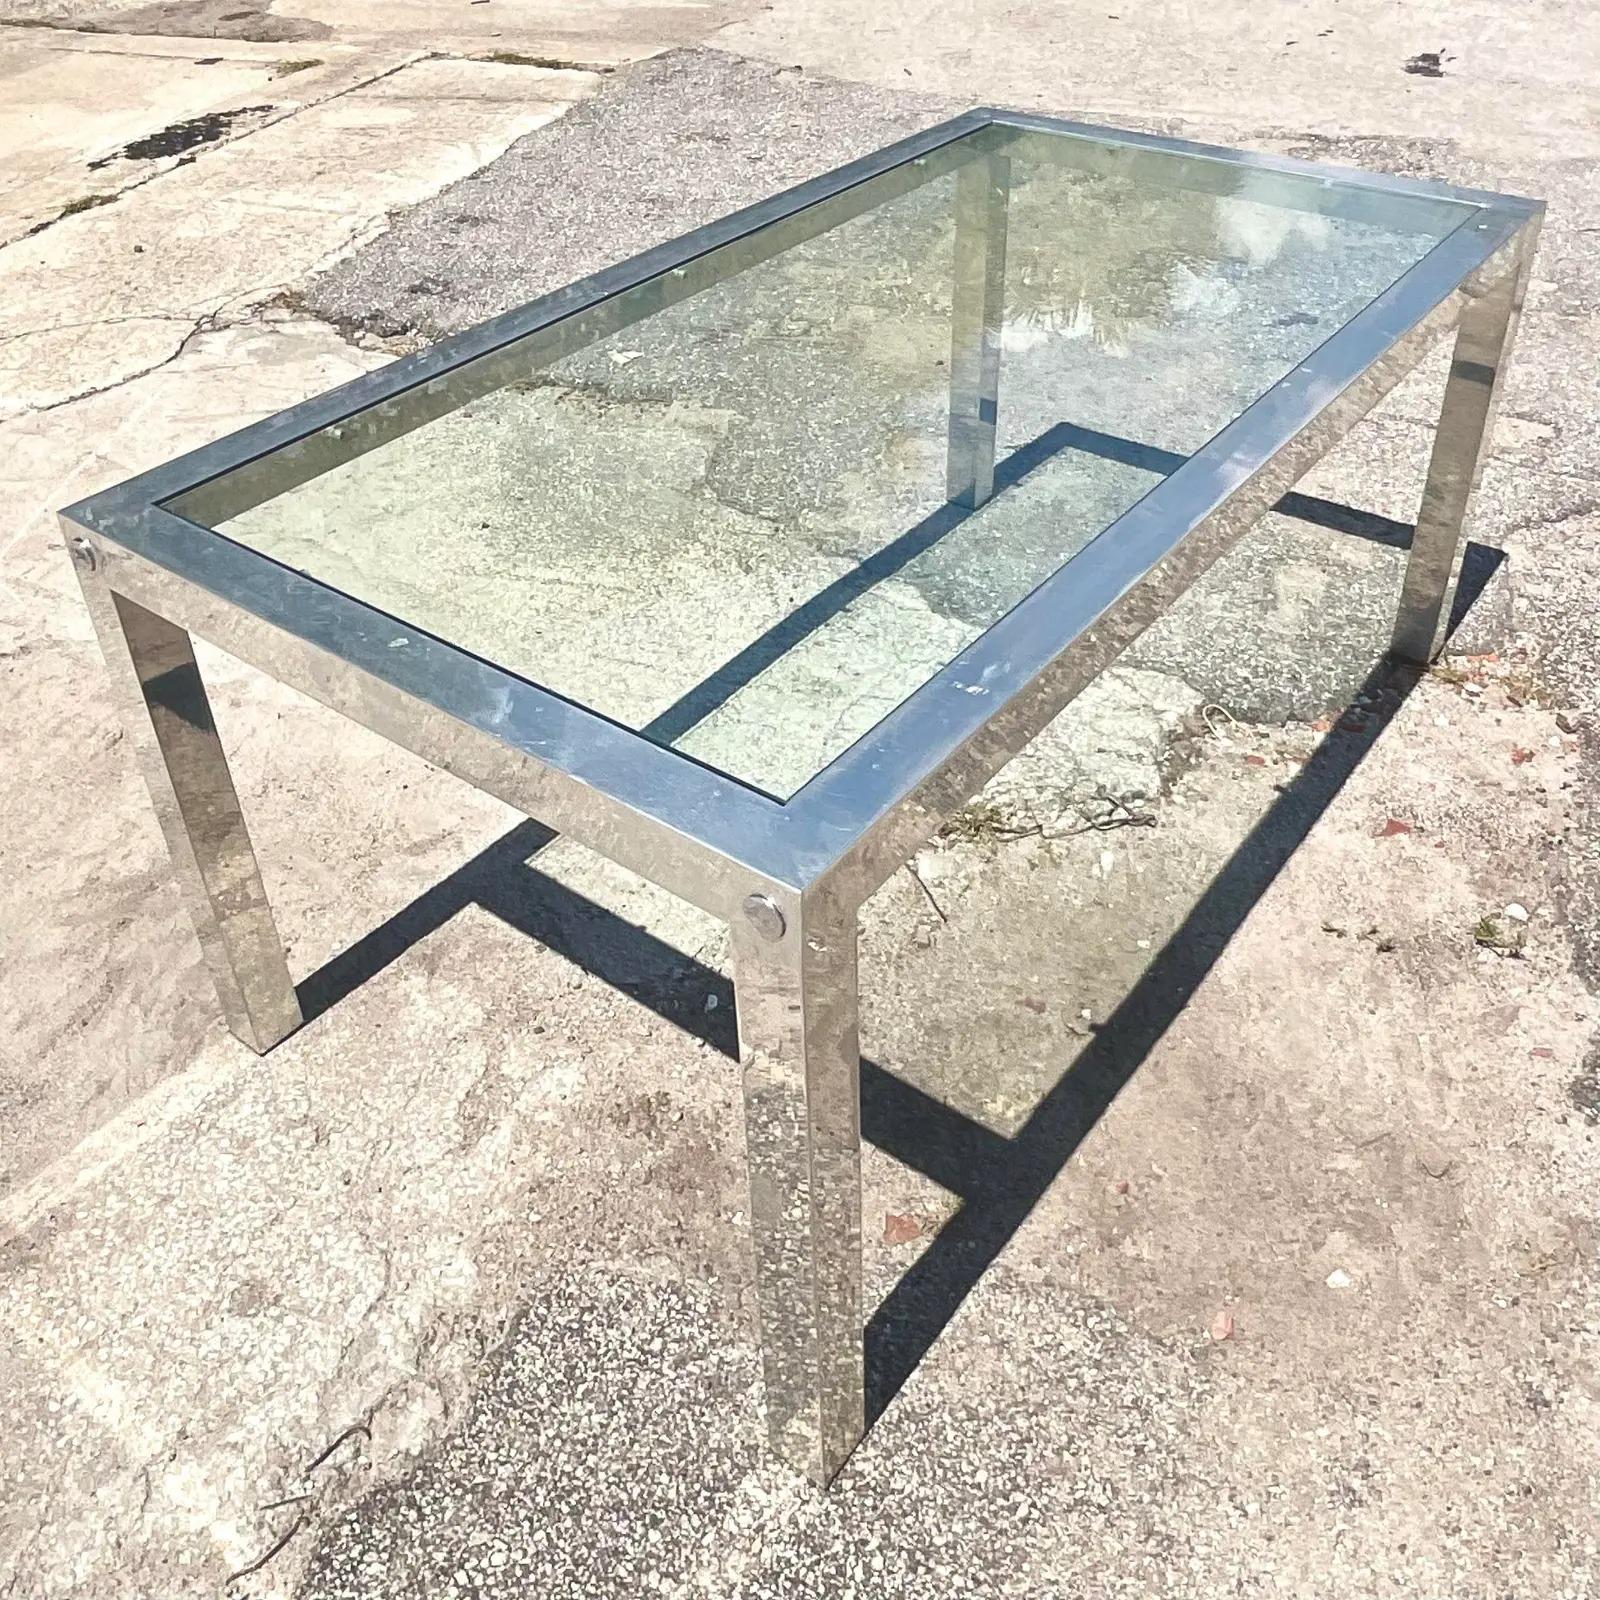 Fabulous vintage Boho dining table. Beautiful chrome frame with an inset glass panel. Chic and simple in its design. Acquired from a Palm Beach estate.